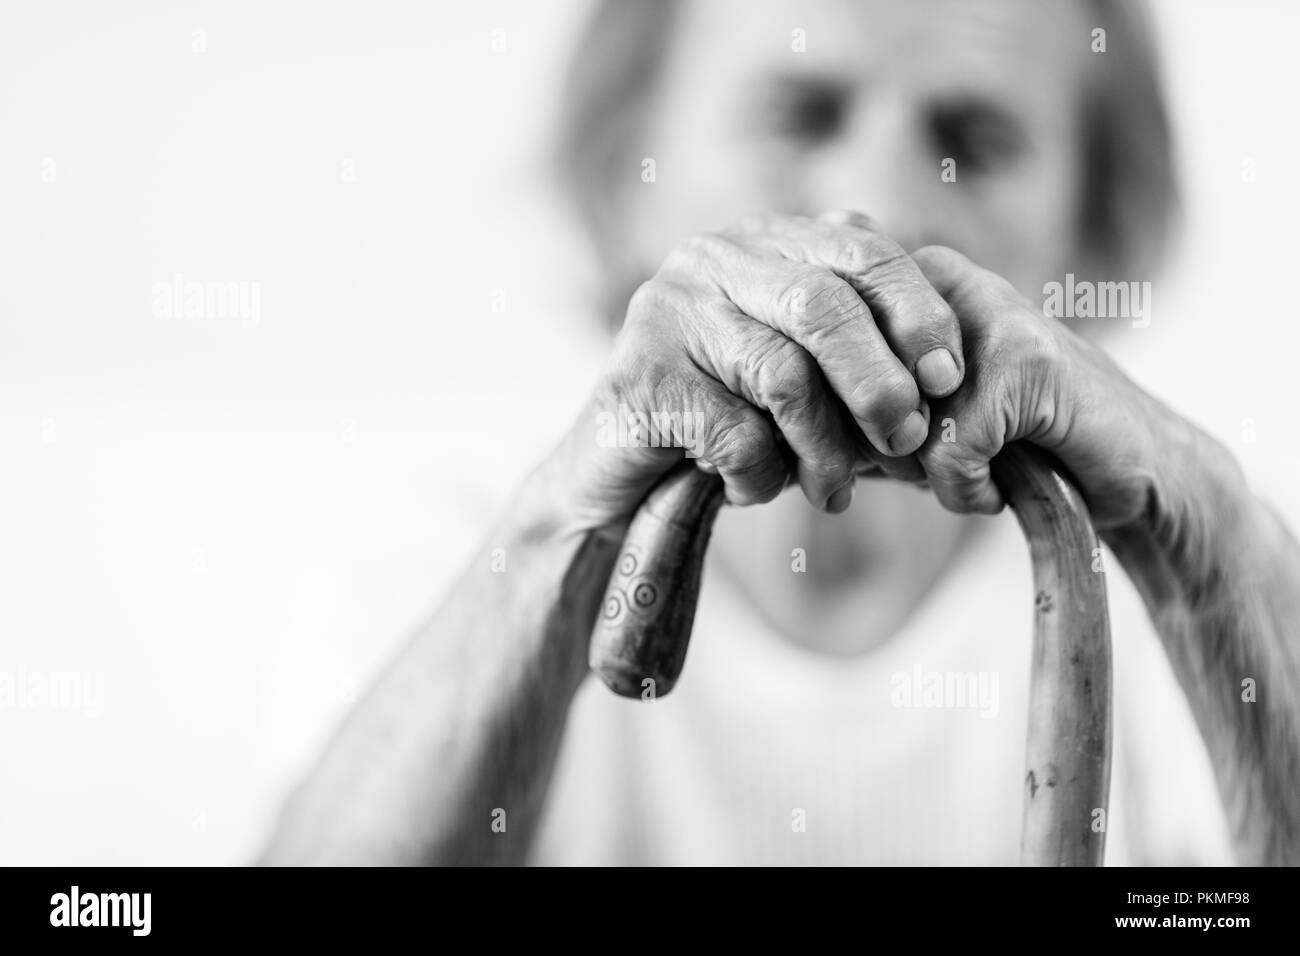 Elderly woman in the 80s with a walking stick Stock Photo